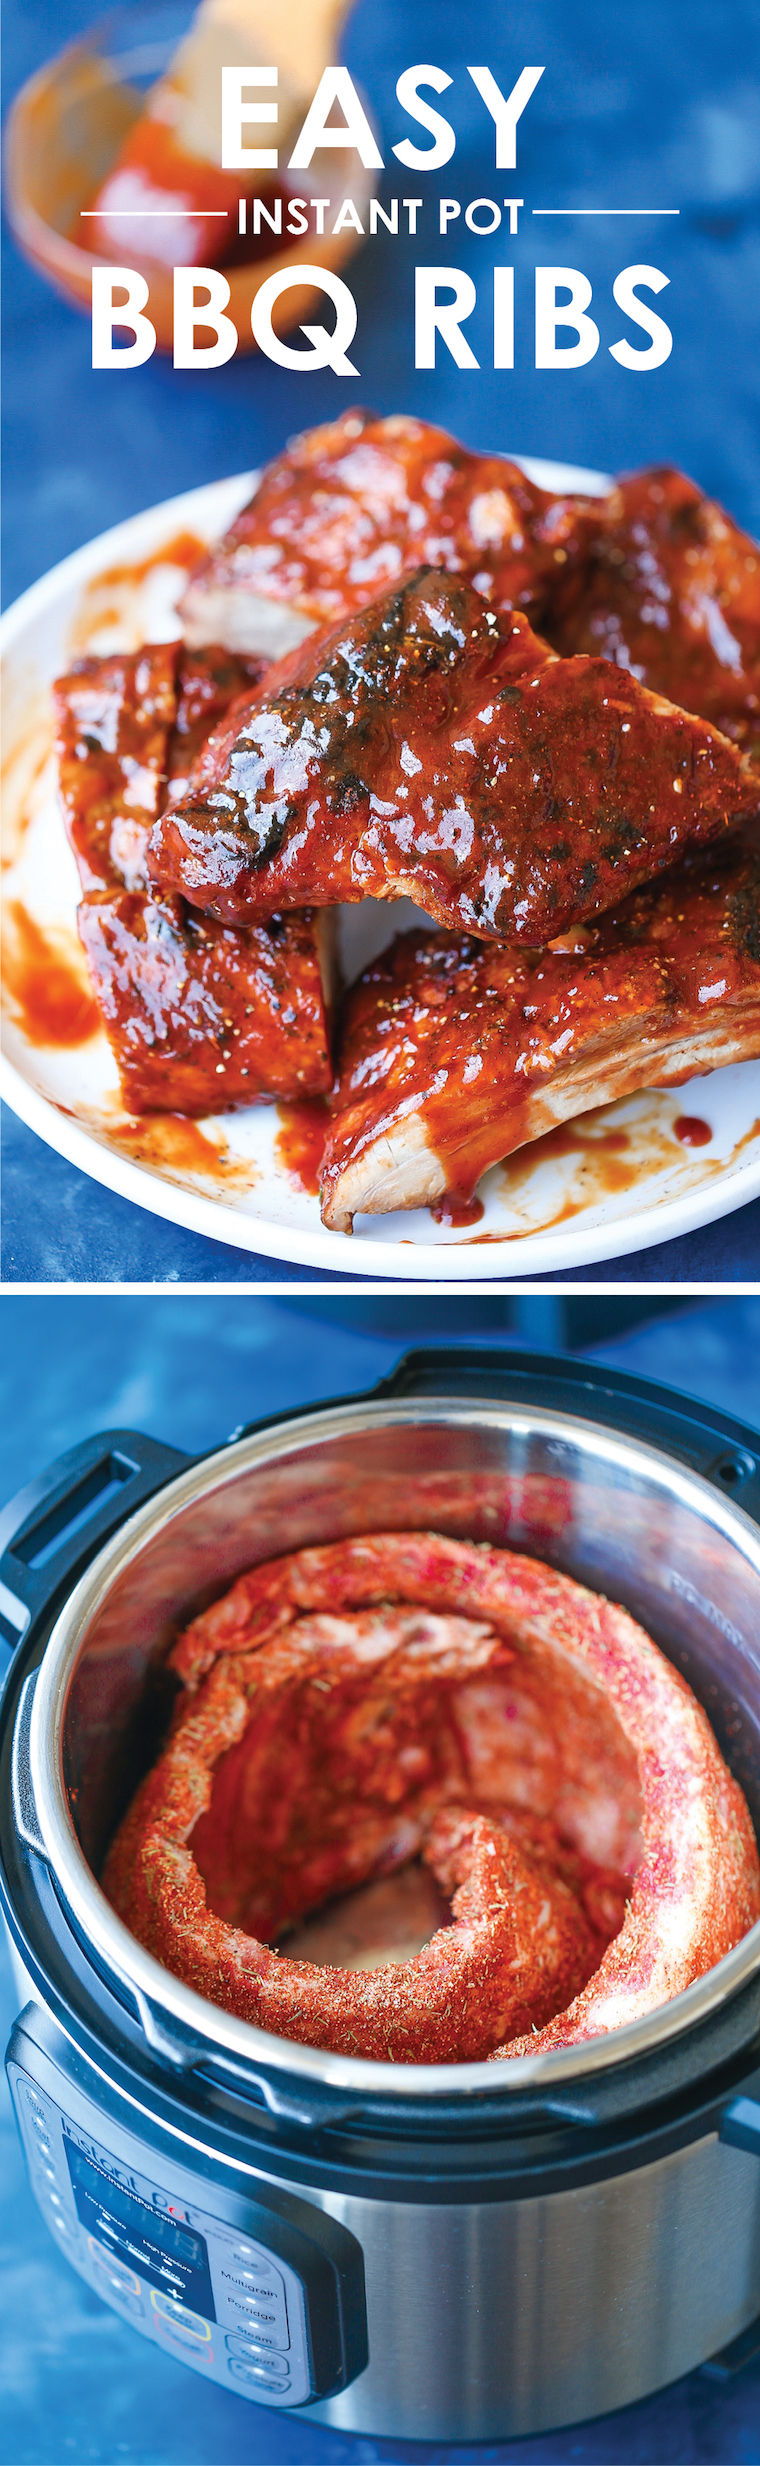 Easy Instant Pot BBQ Ribs - The easiest and quickest BBQ ribs made right in your pressure cooker! So saucy, sticky, and tender, it just falls off-the-bone!